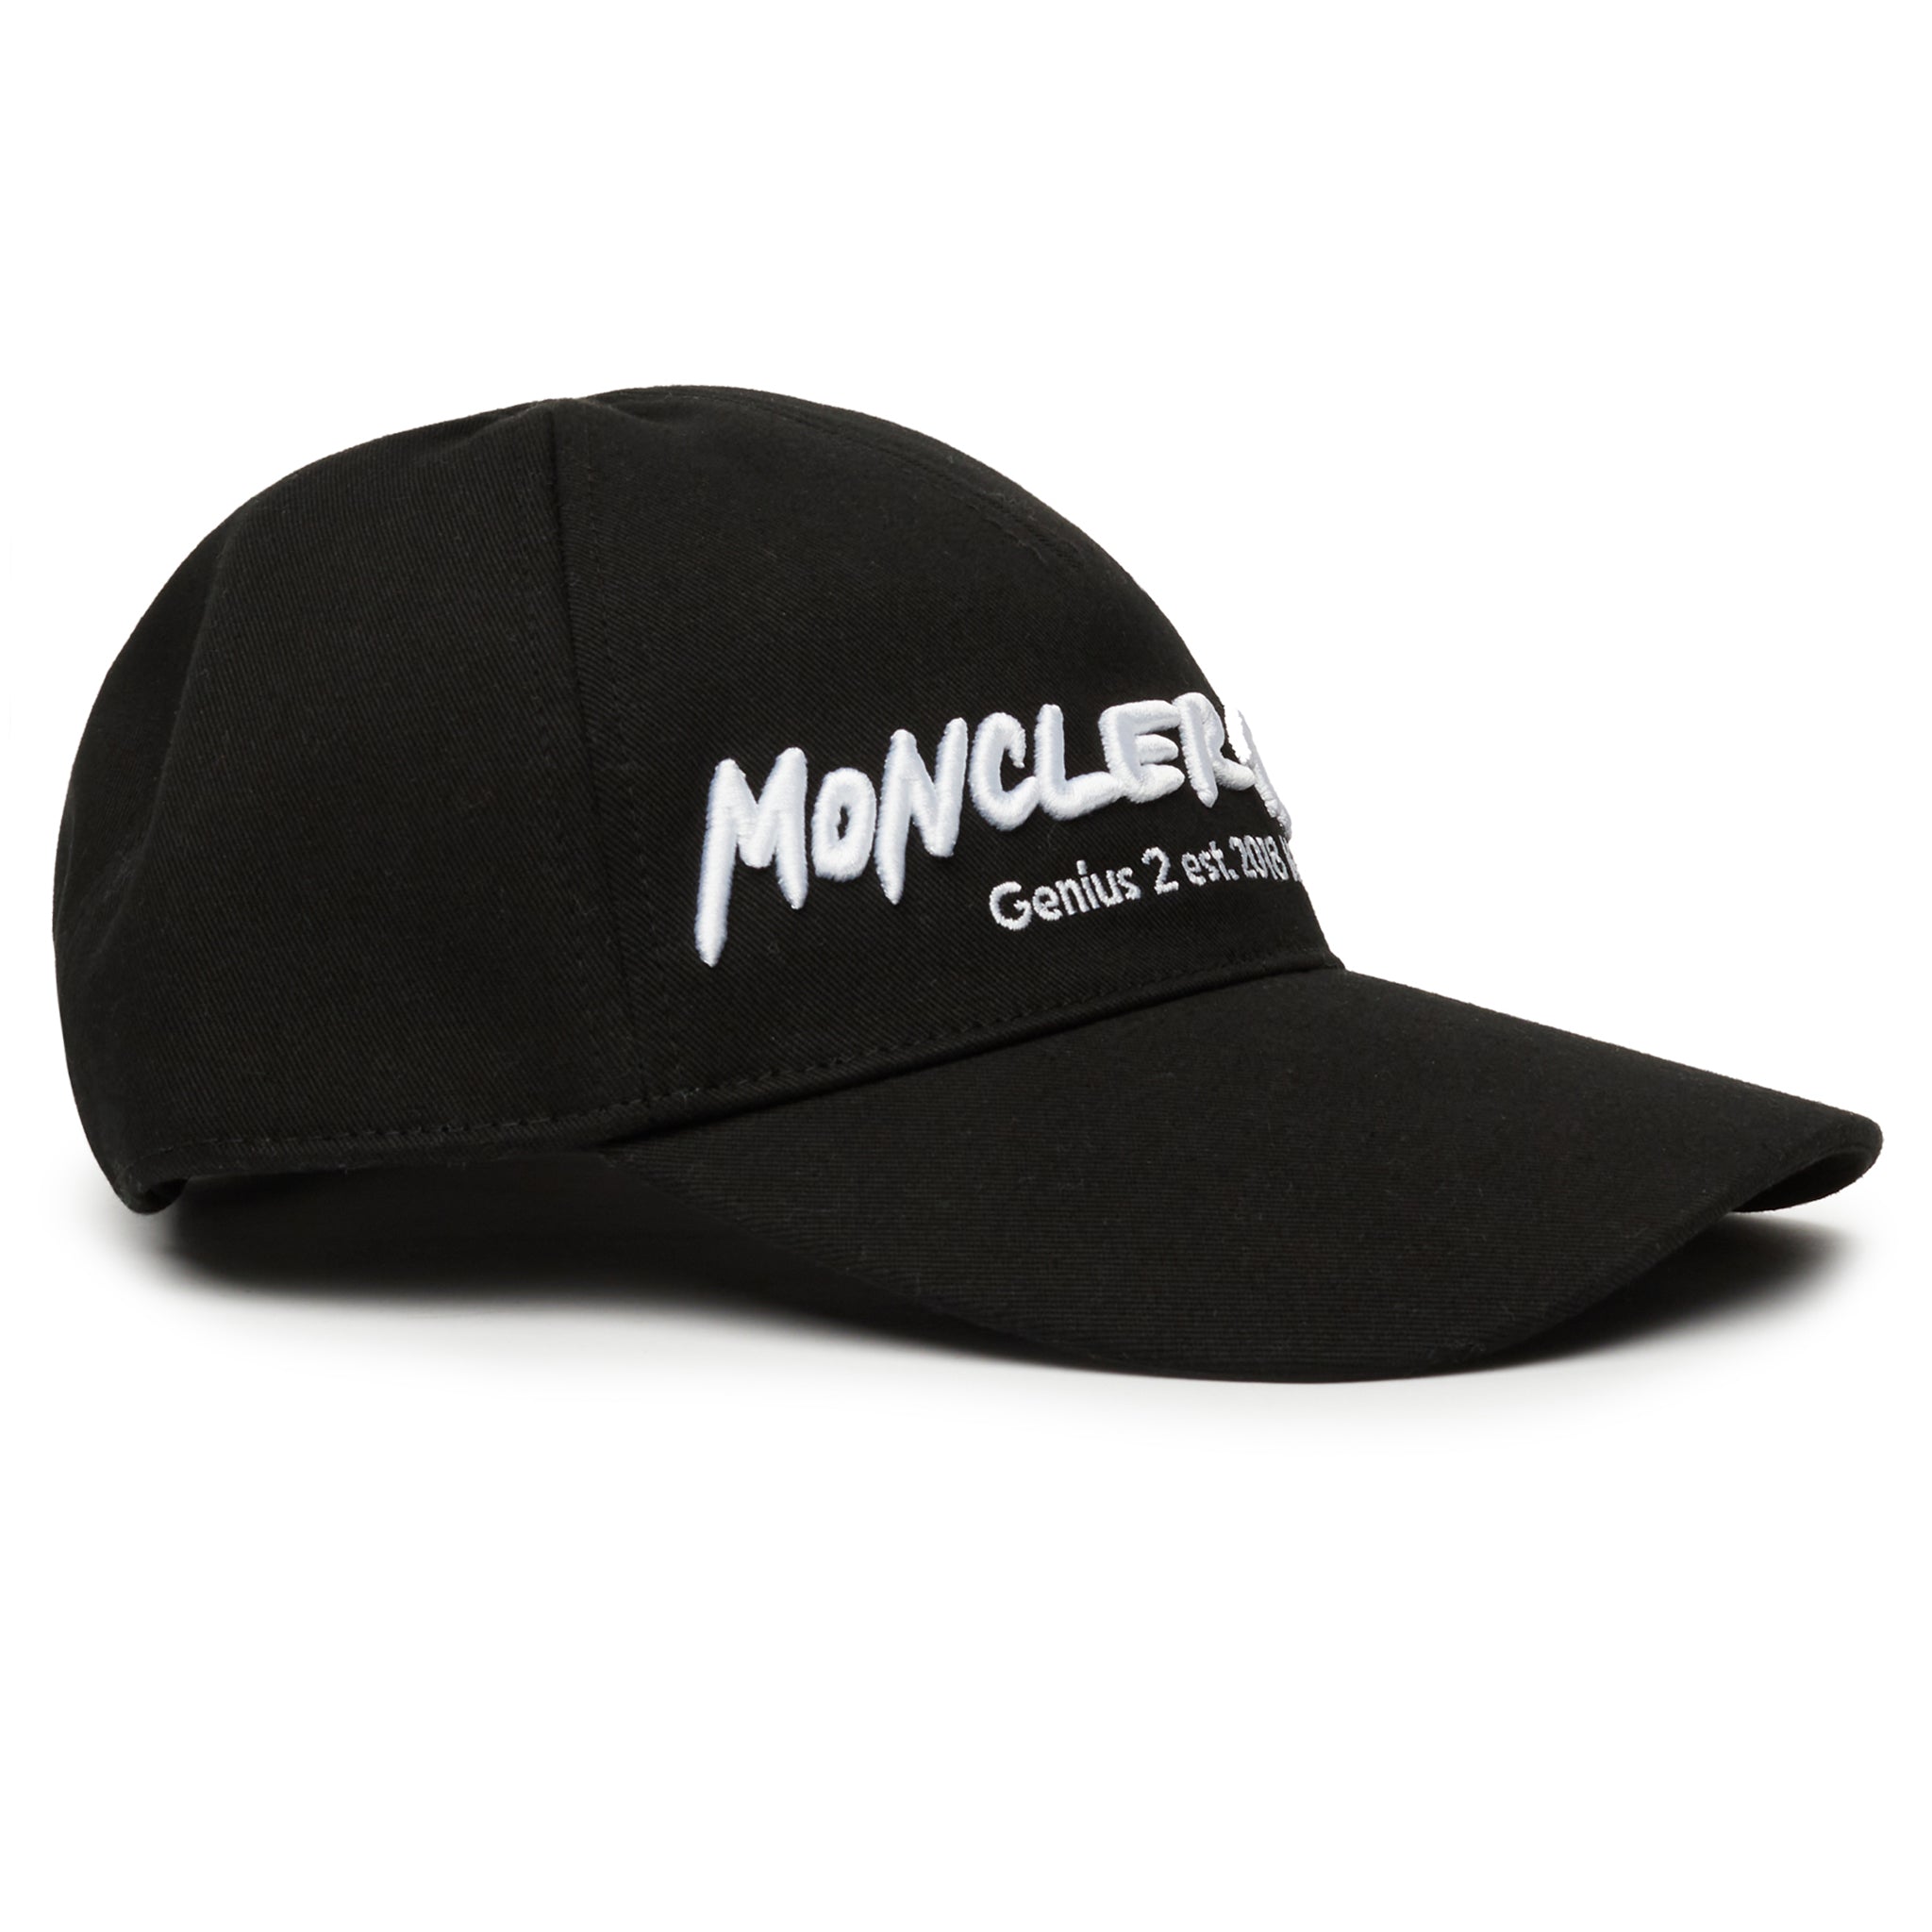 Image of Moncler Genius 2 Moncler 1952 Embroidered Black White Cap